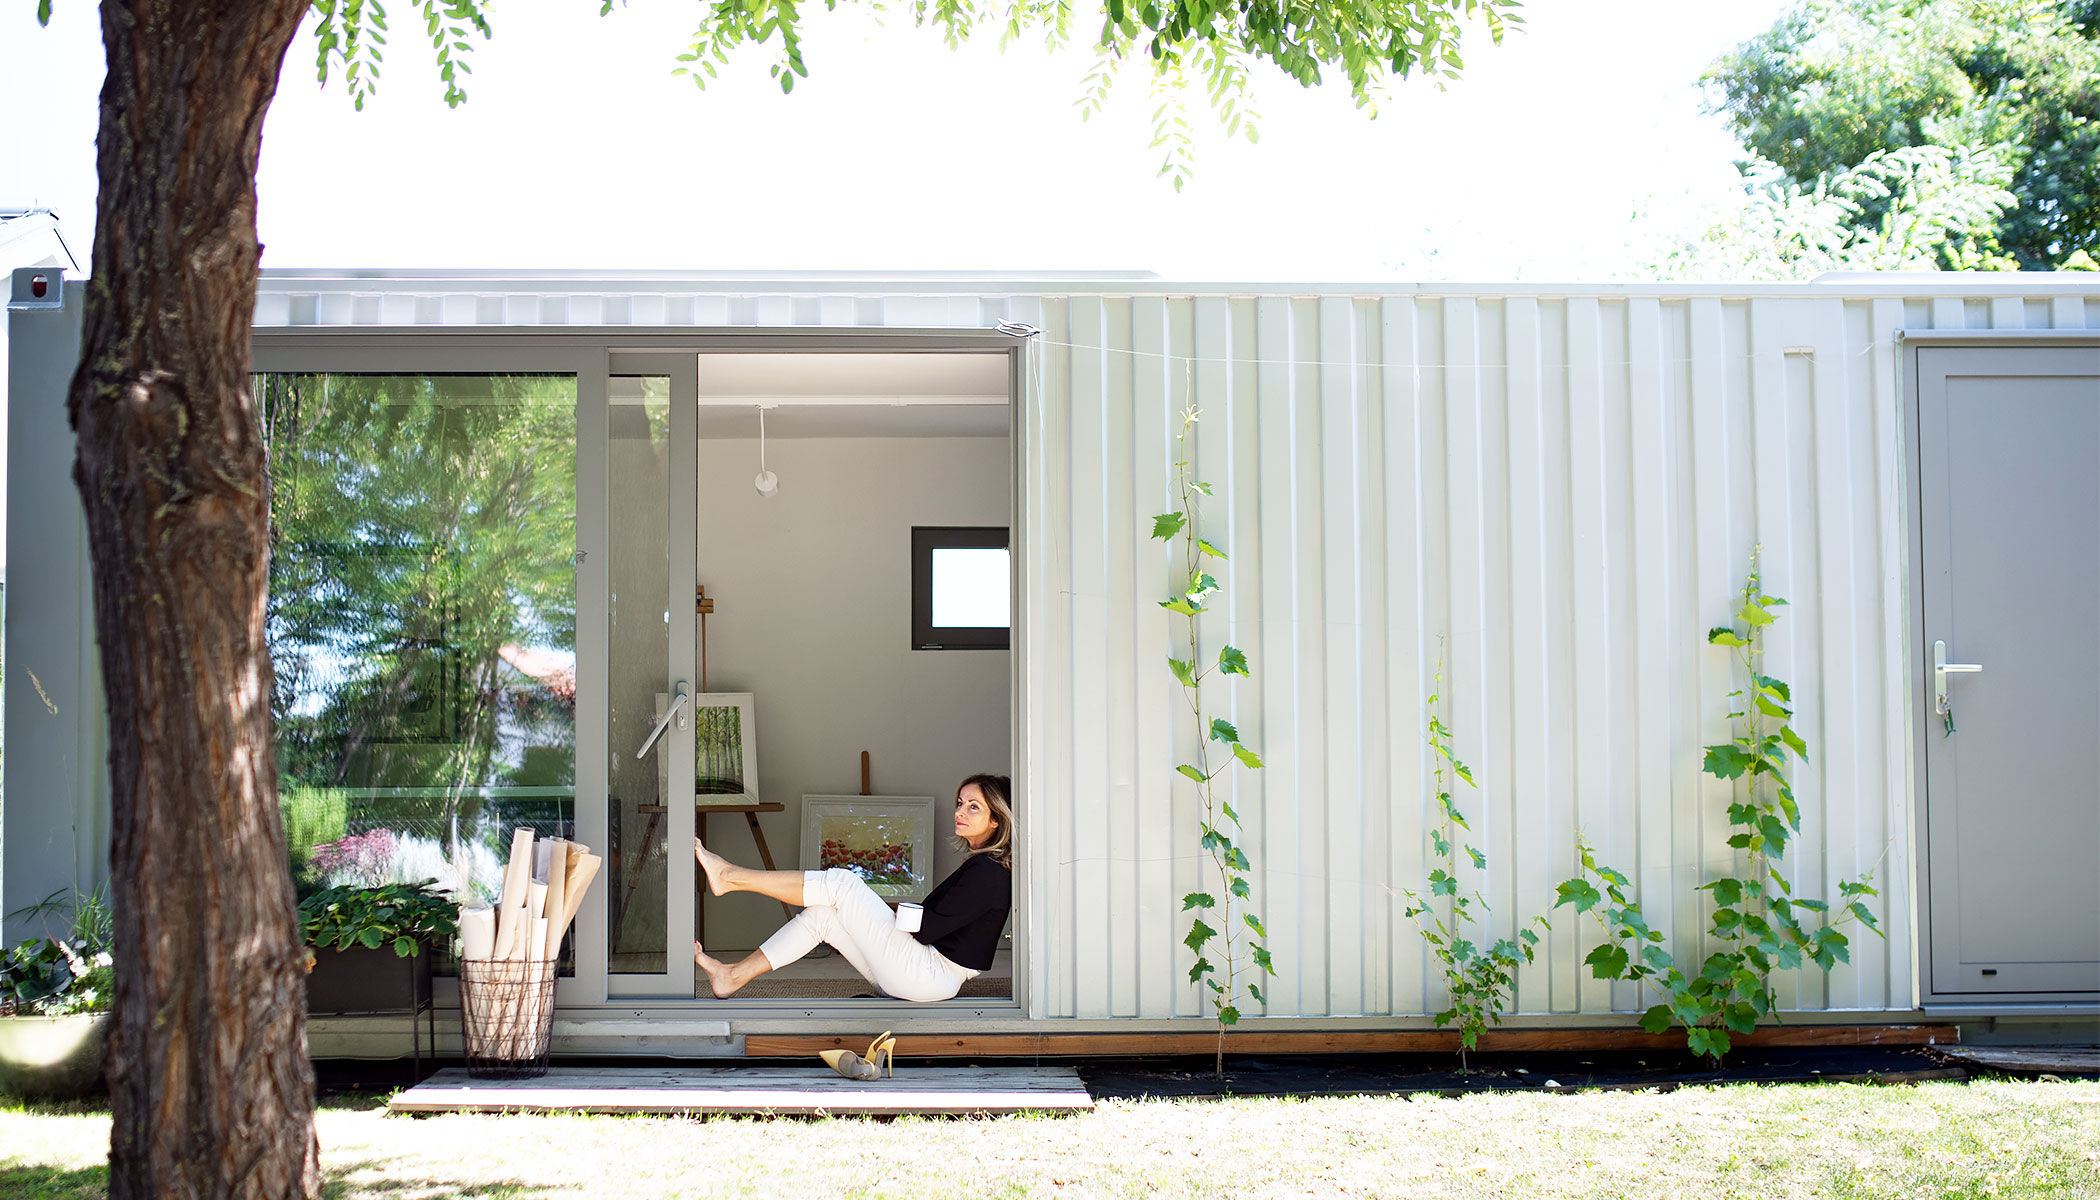 This House Made From Shipping Containers Was Designed For A Family In New  York